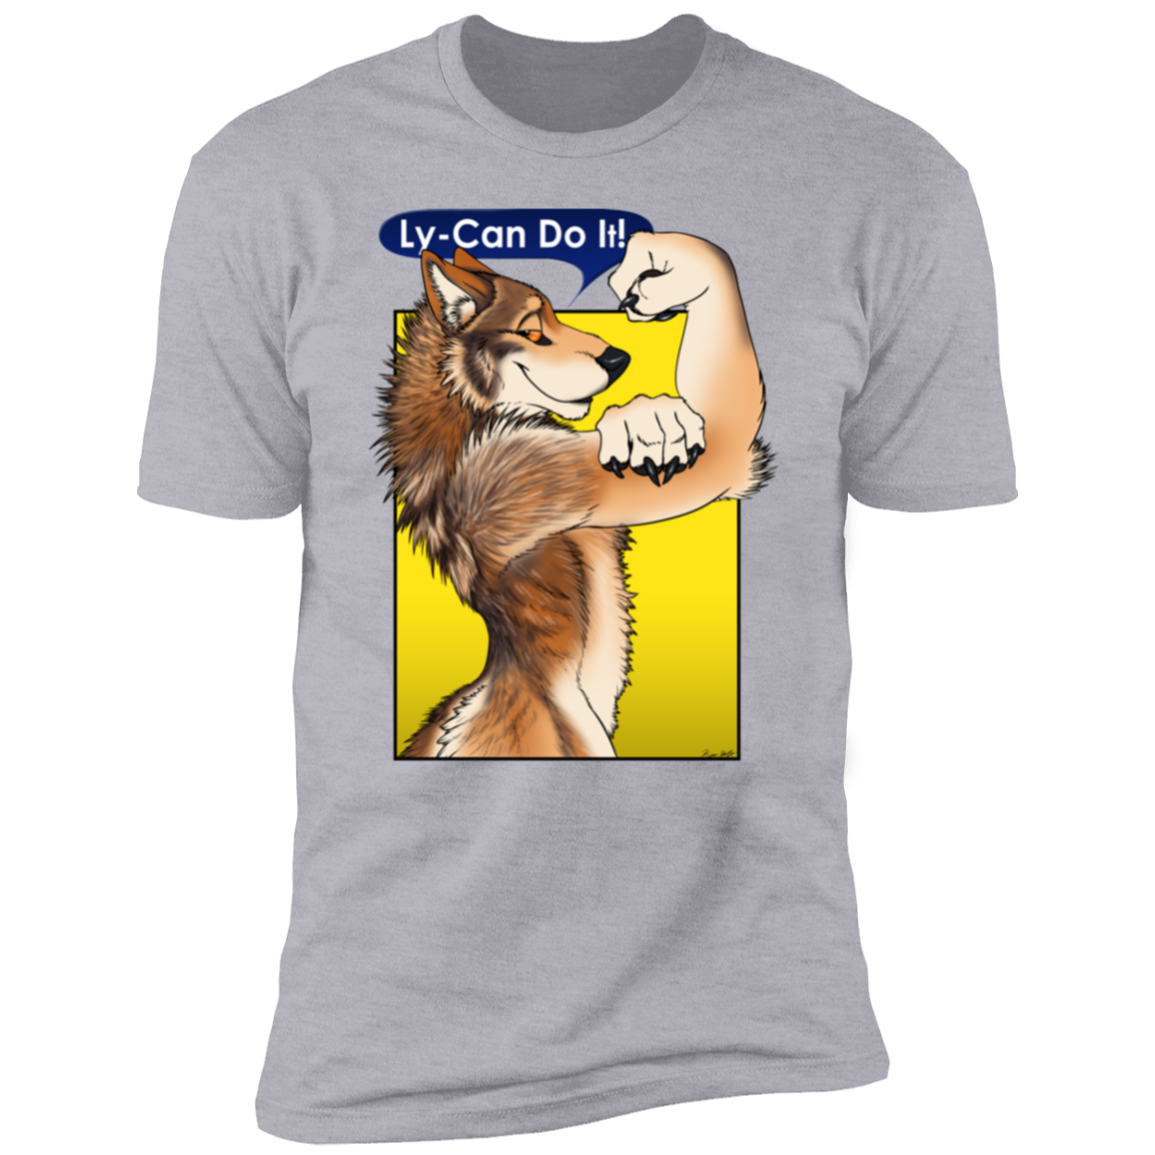 Ly-Can Do it! T-Shirt